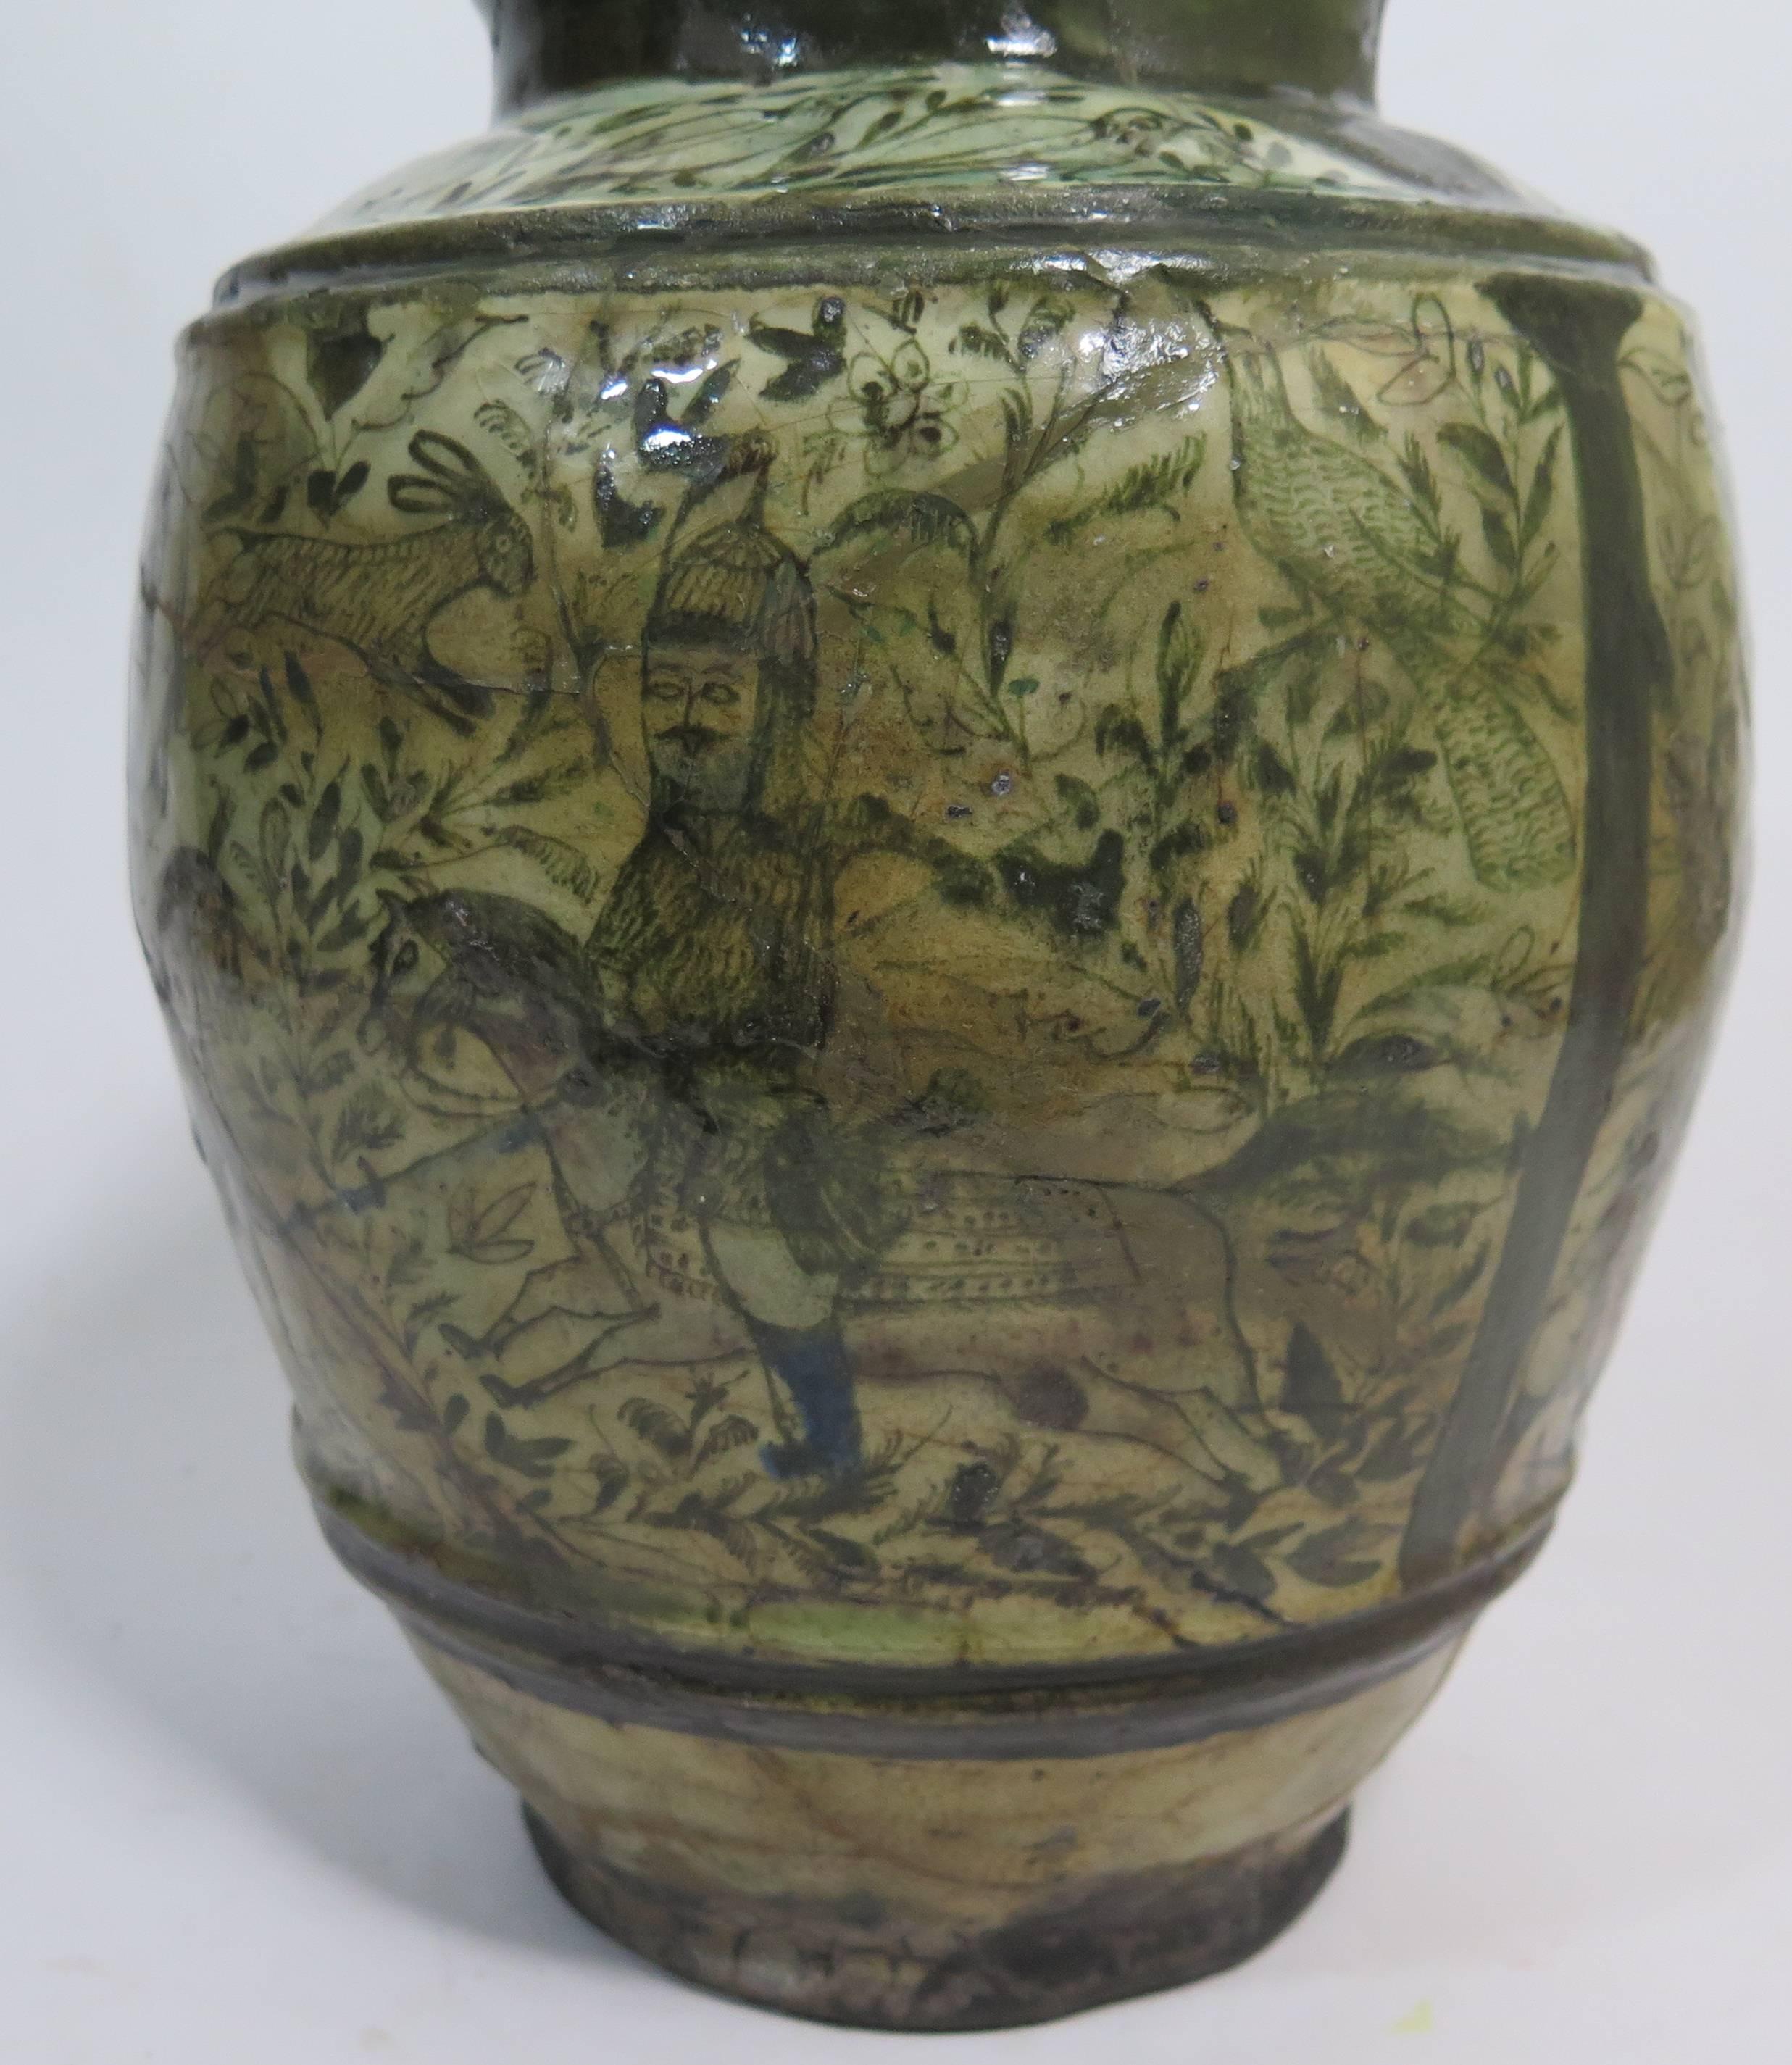 Beautiful and very early Persian ceramic jar. Hunting scenes and animal figures throughout. Old repairs throughout.